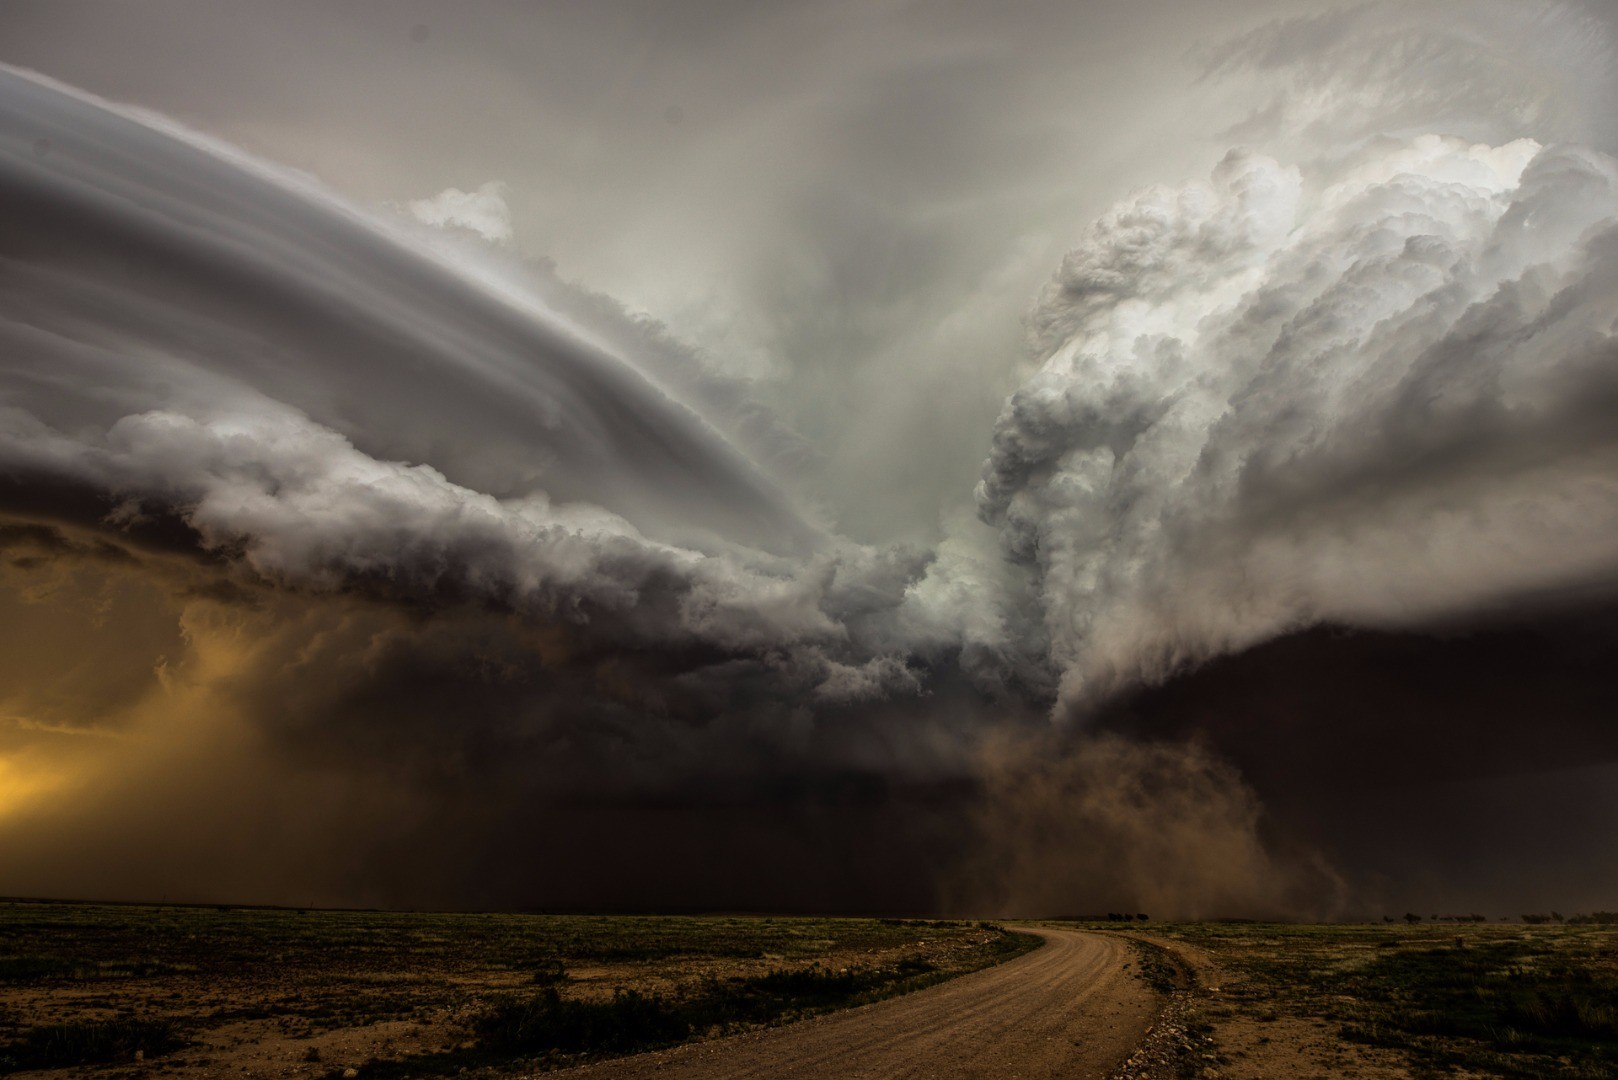 nature, Photography, Landscape, Storm, Clouds, Wind, Dirt road, Supercell (nature) Wallpaper